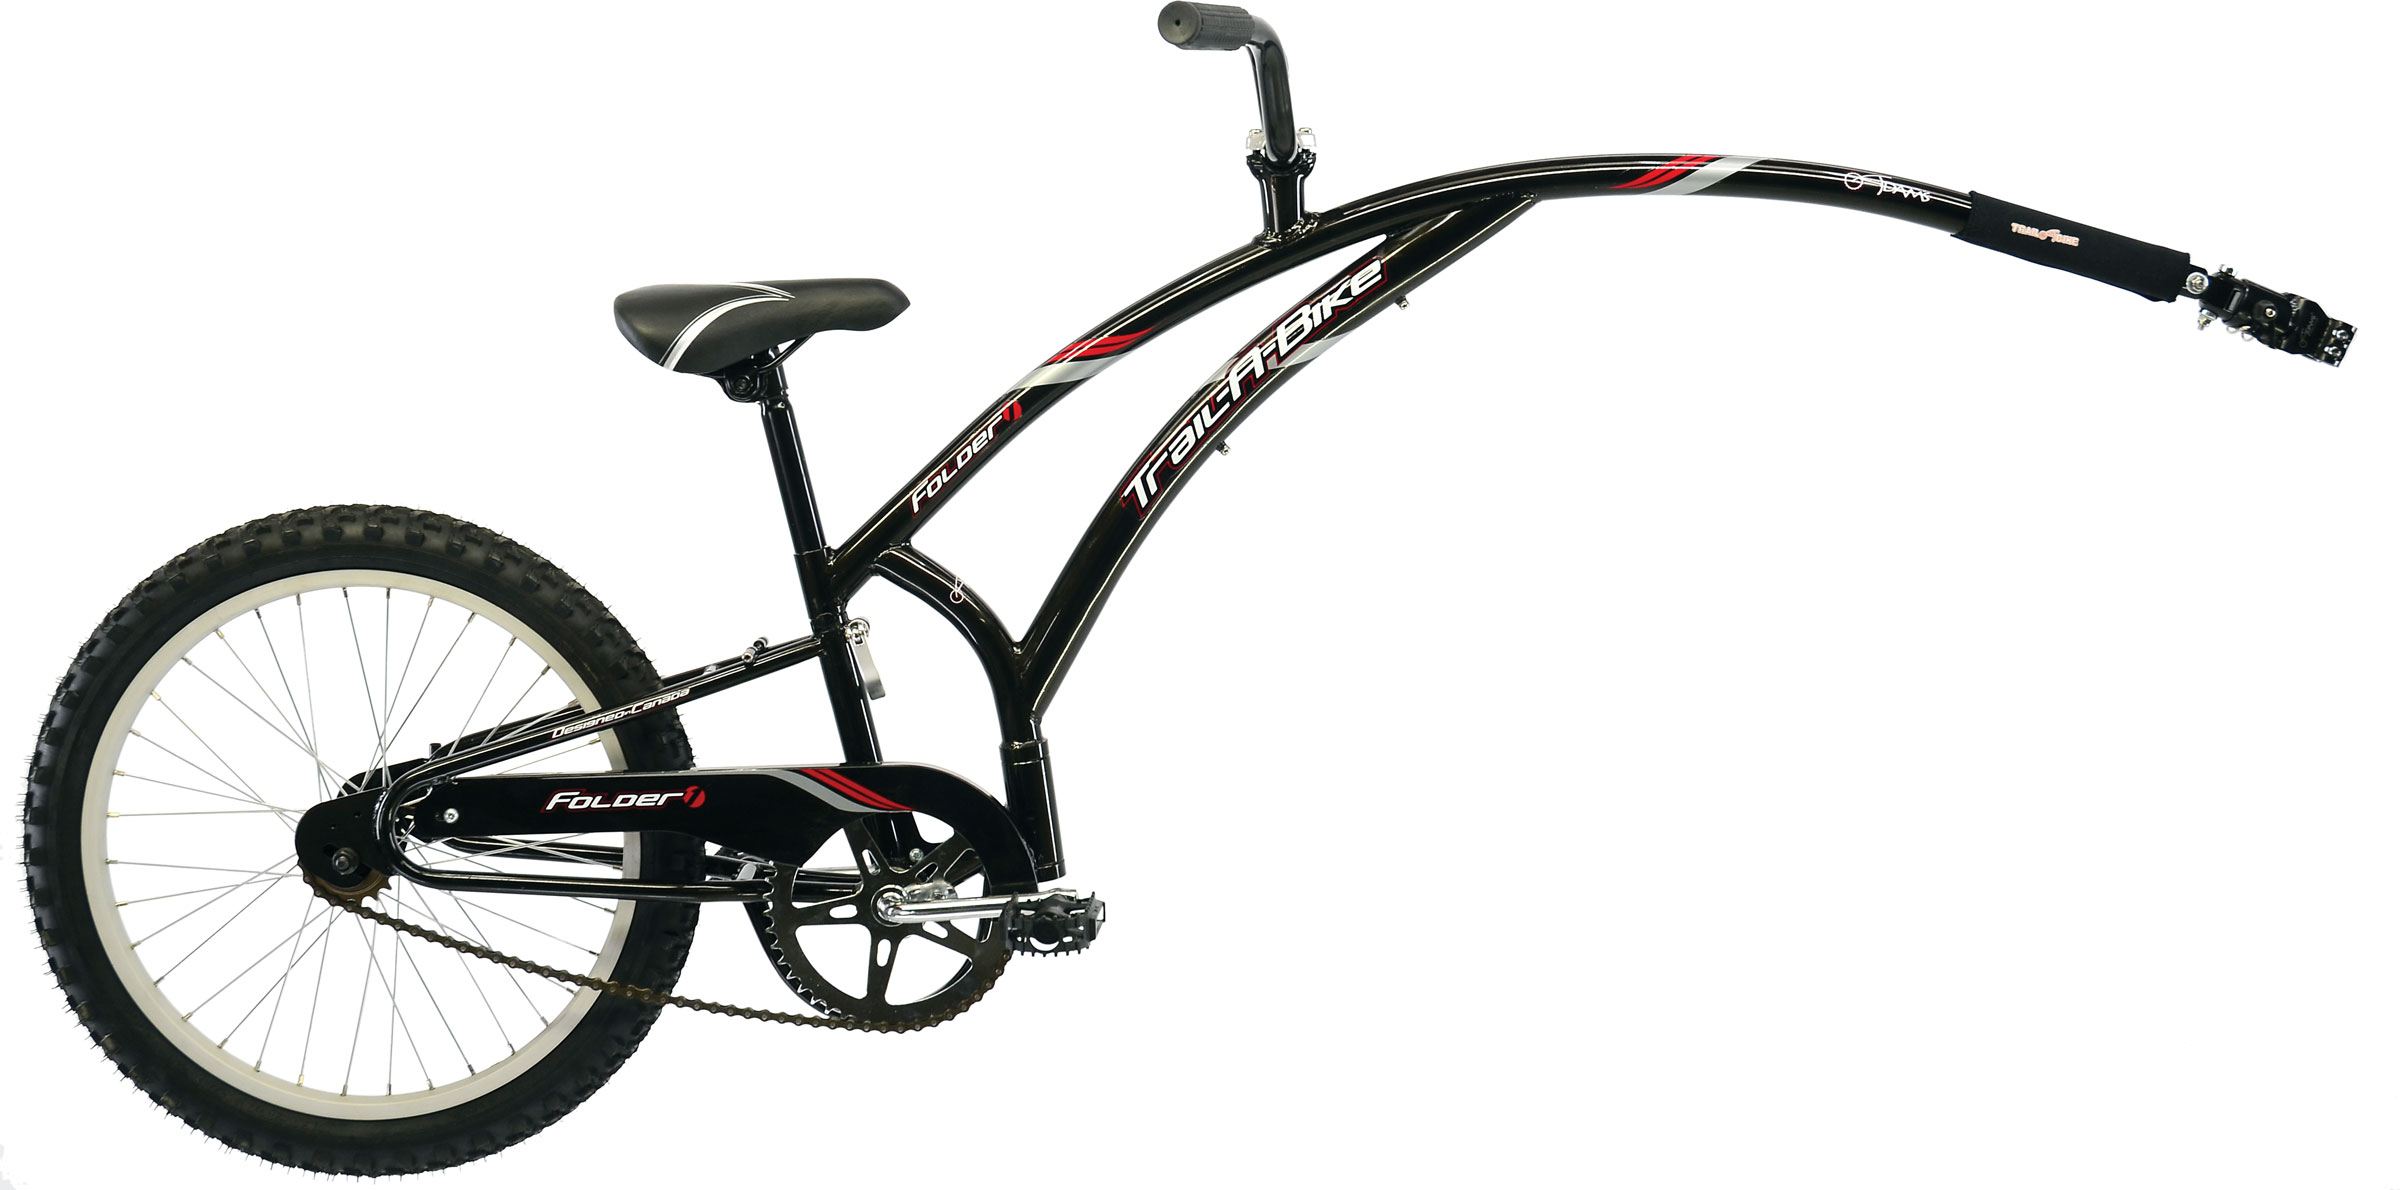 decathlon cycles with price